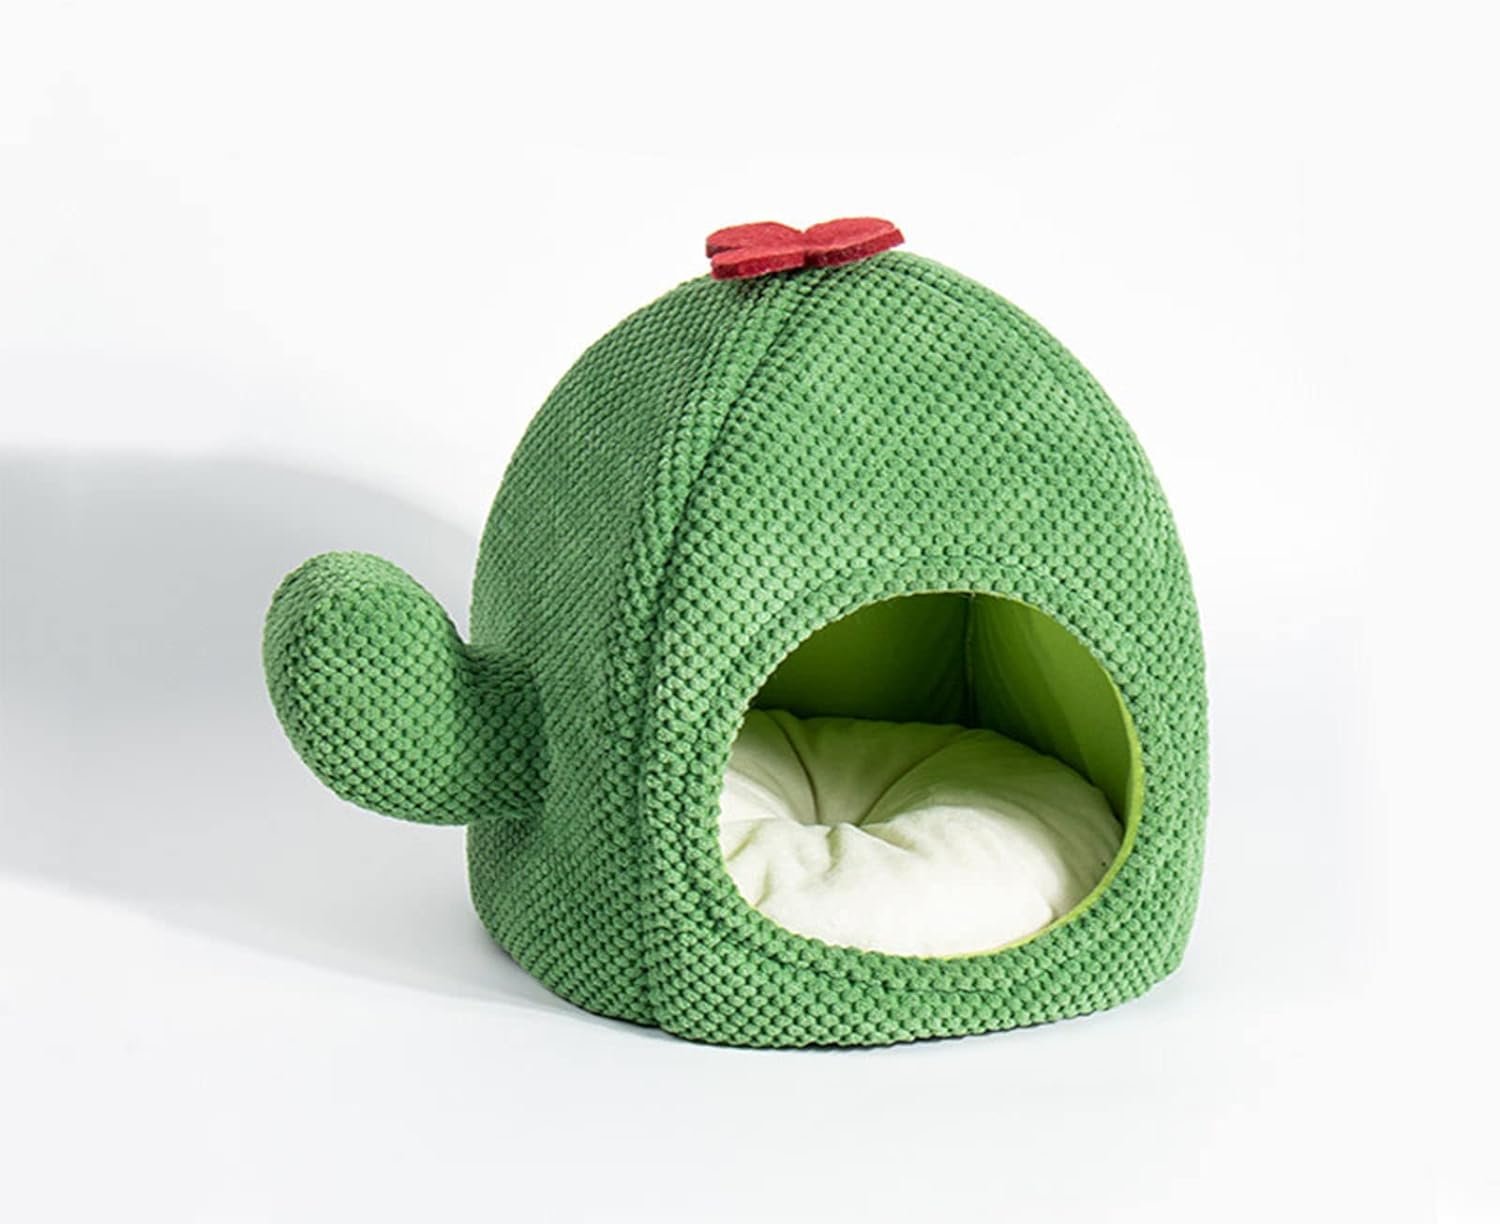 Cute Cat Bed, Cat Bed for Indoor Cats, Cactus Cat Bed Tent Cave with Removable  Washable Cushion Pillow, Soft Pet Cave Beds House for Adult Cats Kitten Puppy(Green)